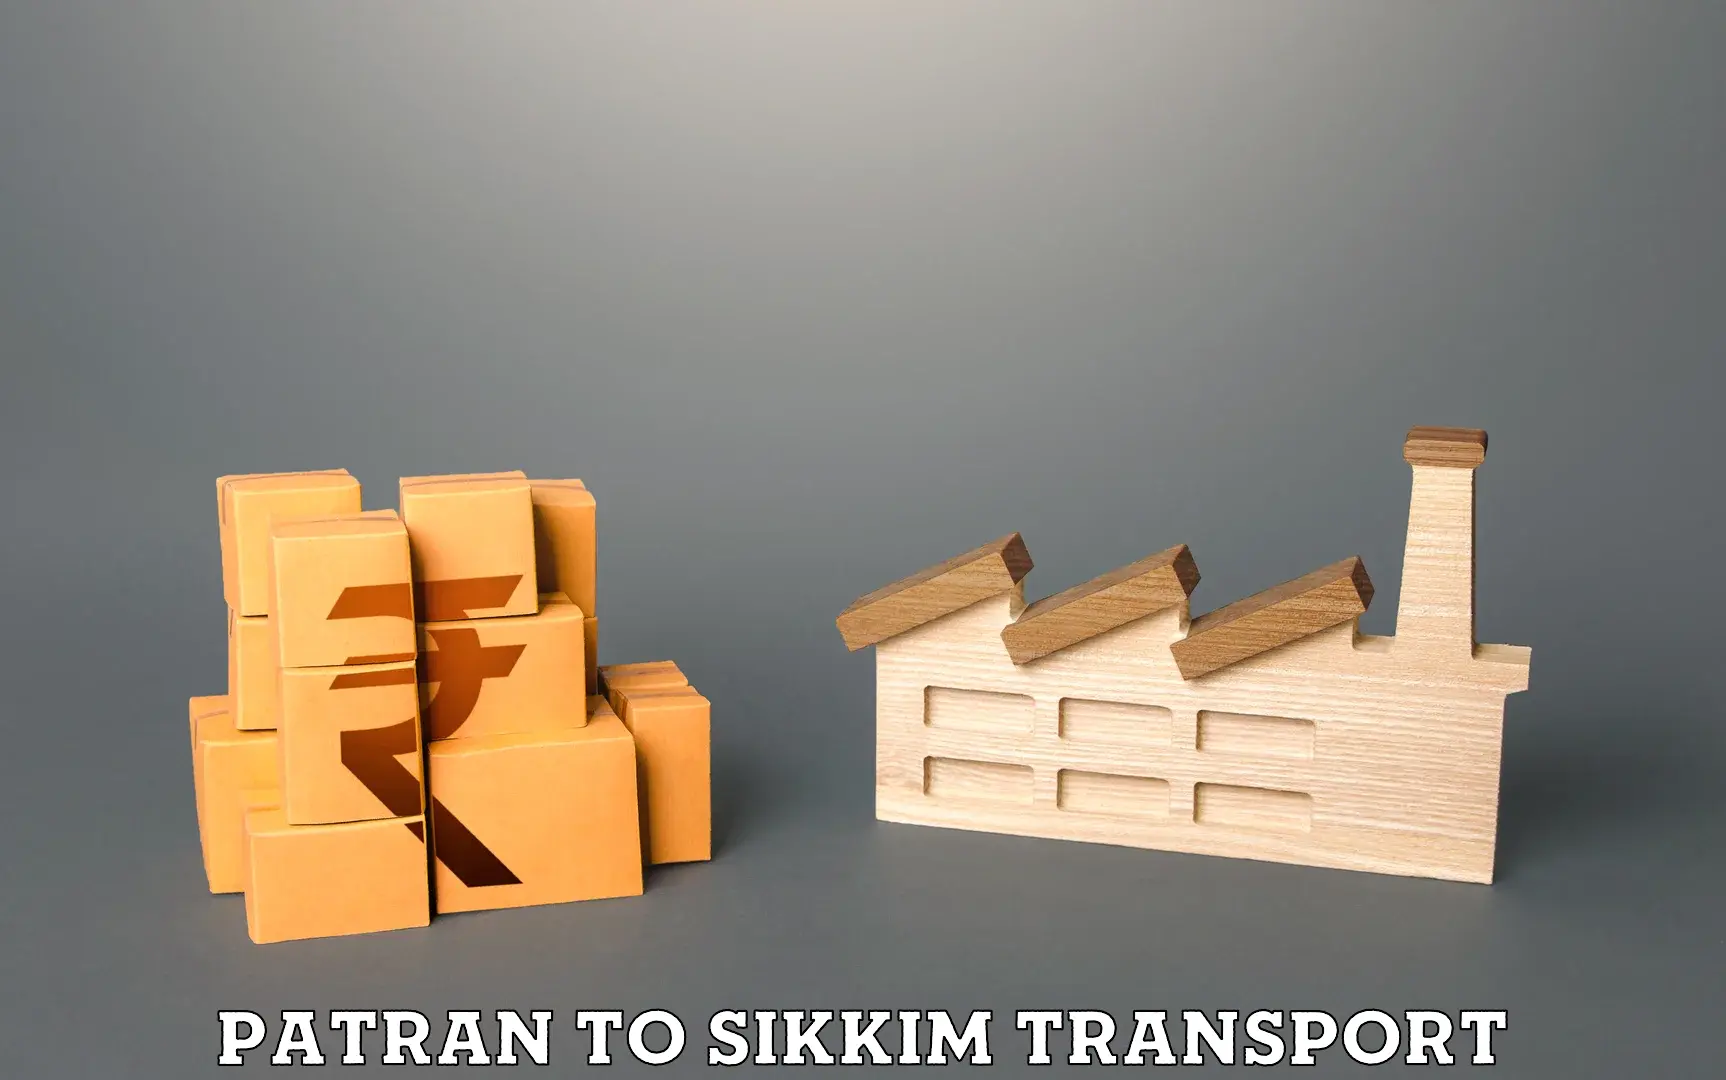 Transport bike from one state to another Patran to Sikkim